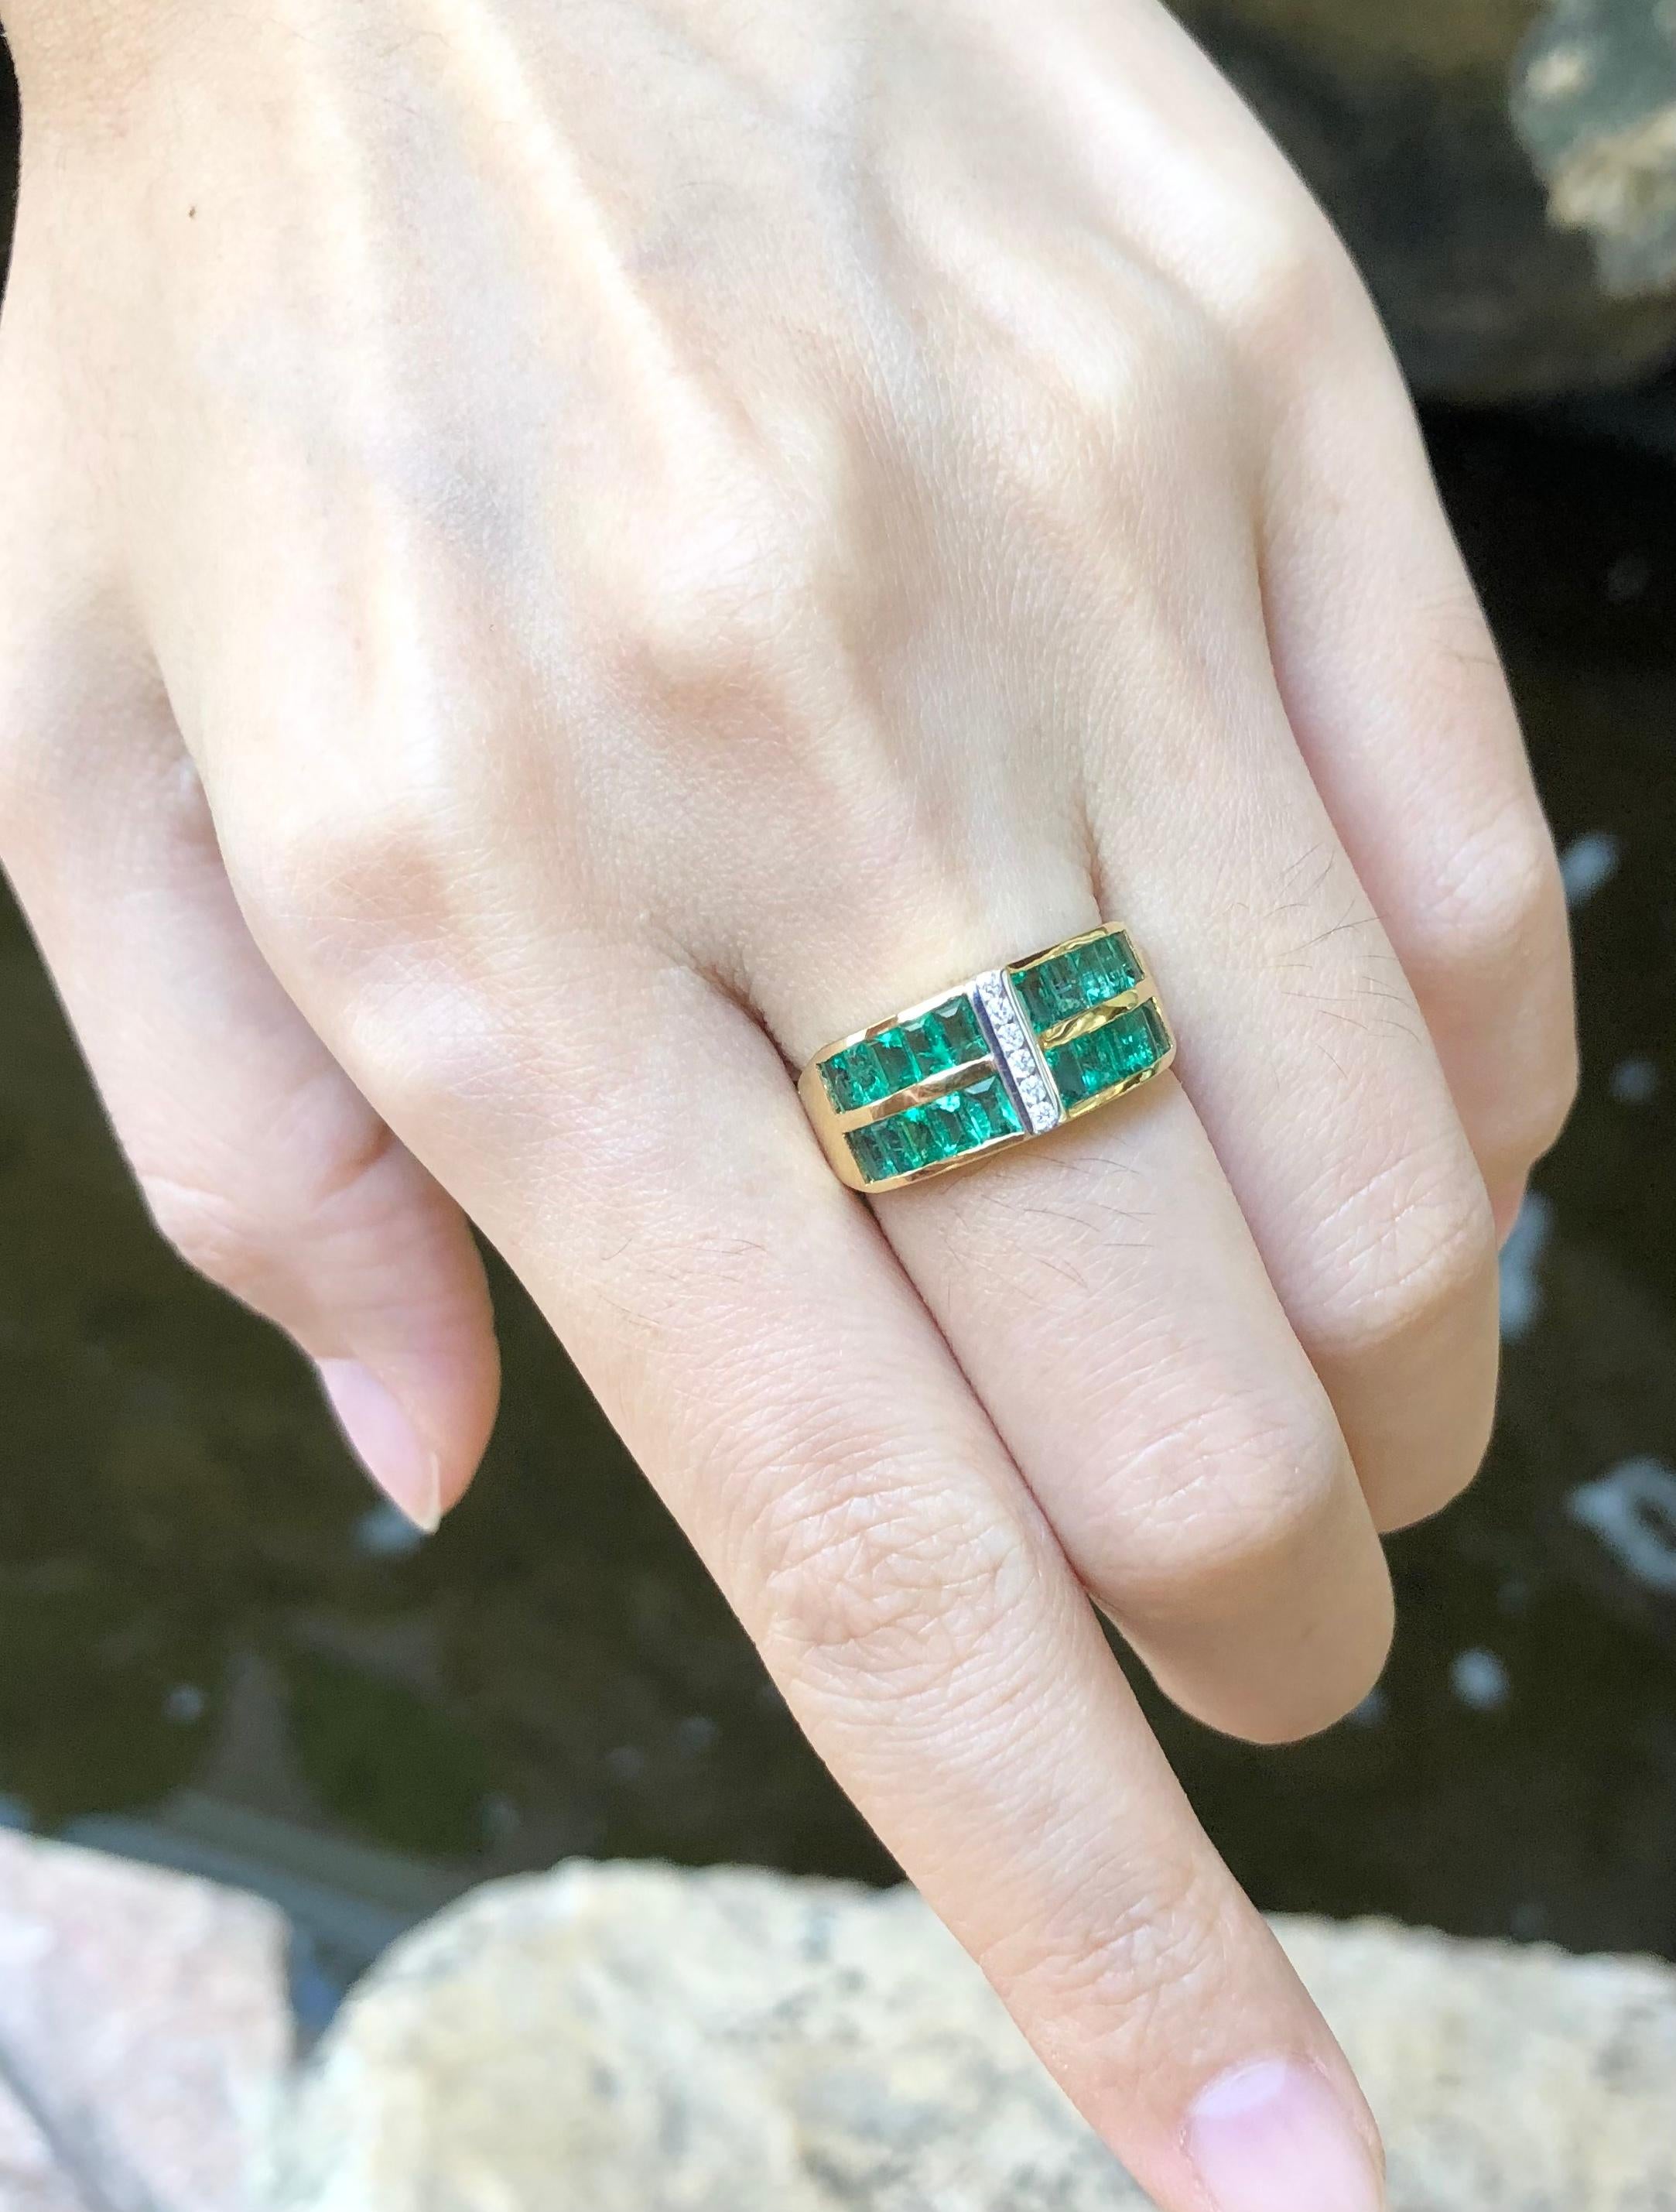 Emerald 1.46 carats with Diamond 0.05 carat Ring set in 18 Karat Gold Settings

Width:  1.9 cm 
Length: 0.8 cm
Ring Size: 53
Total Weight: 6.17 grams

